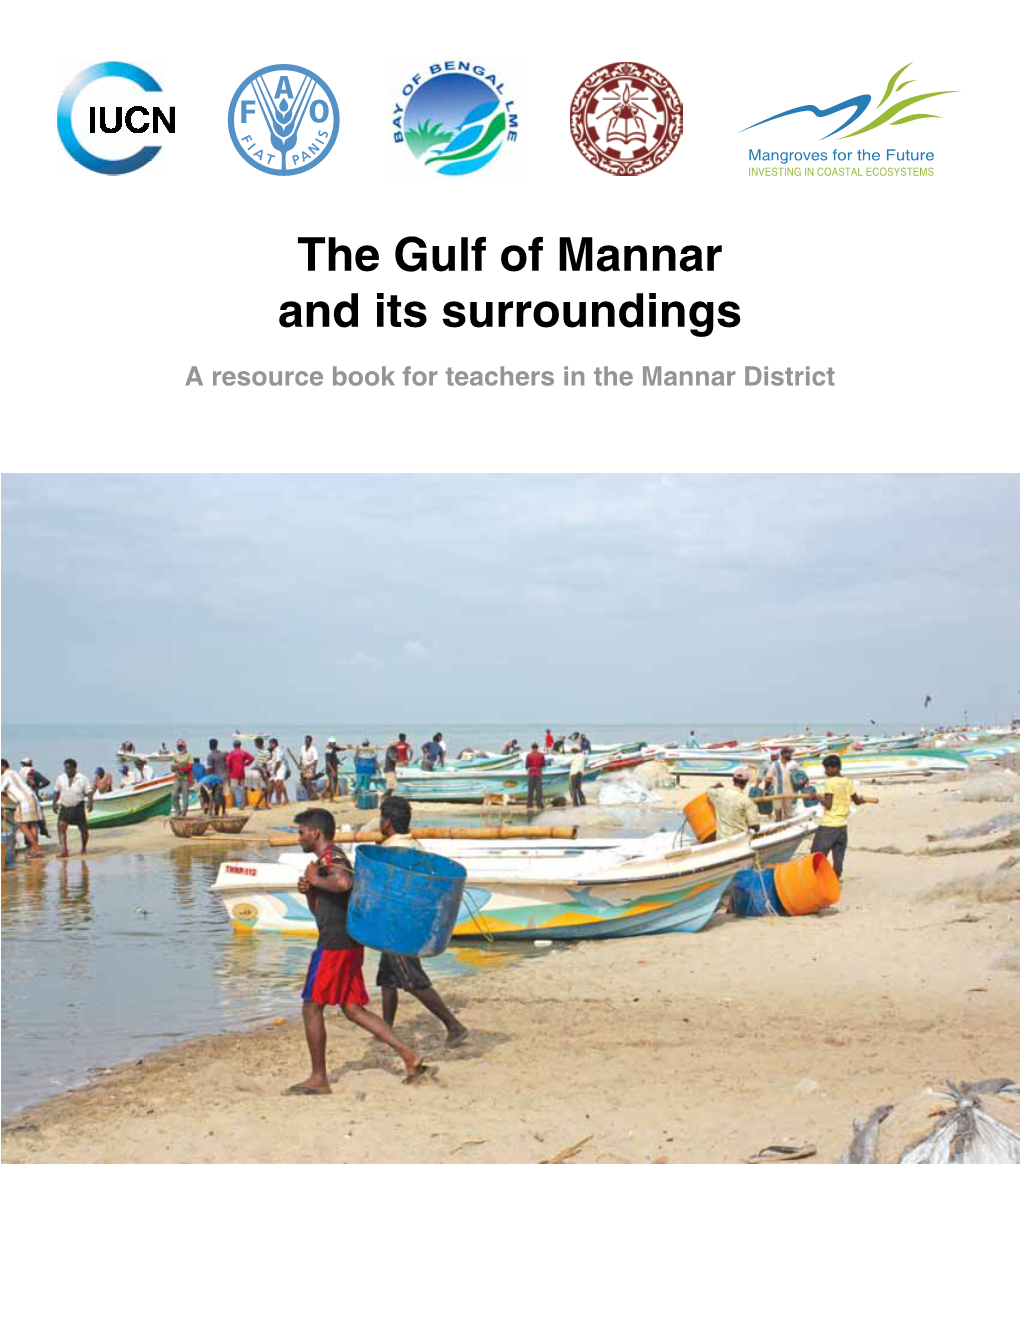 The Gulf of Mannar and Its Surroundings a Resource Book for Teachers in the Mannar District